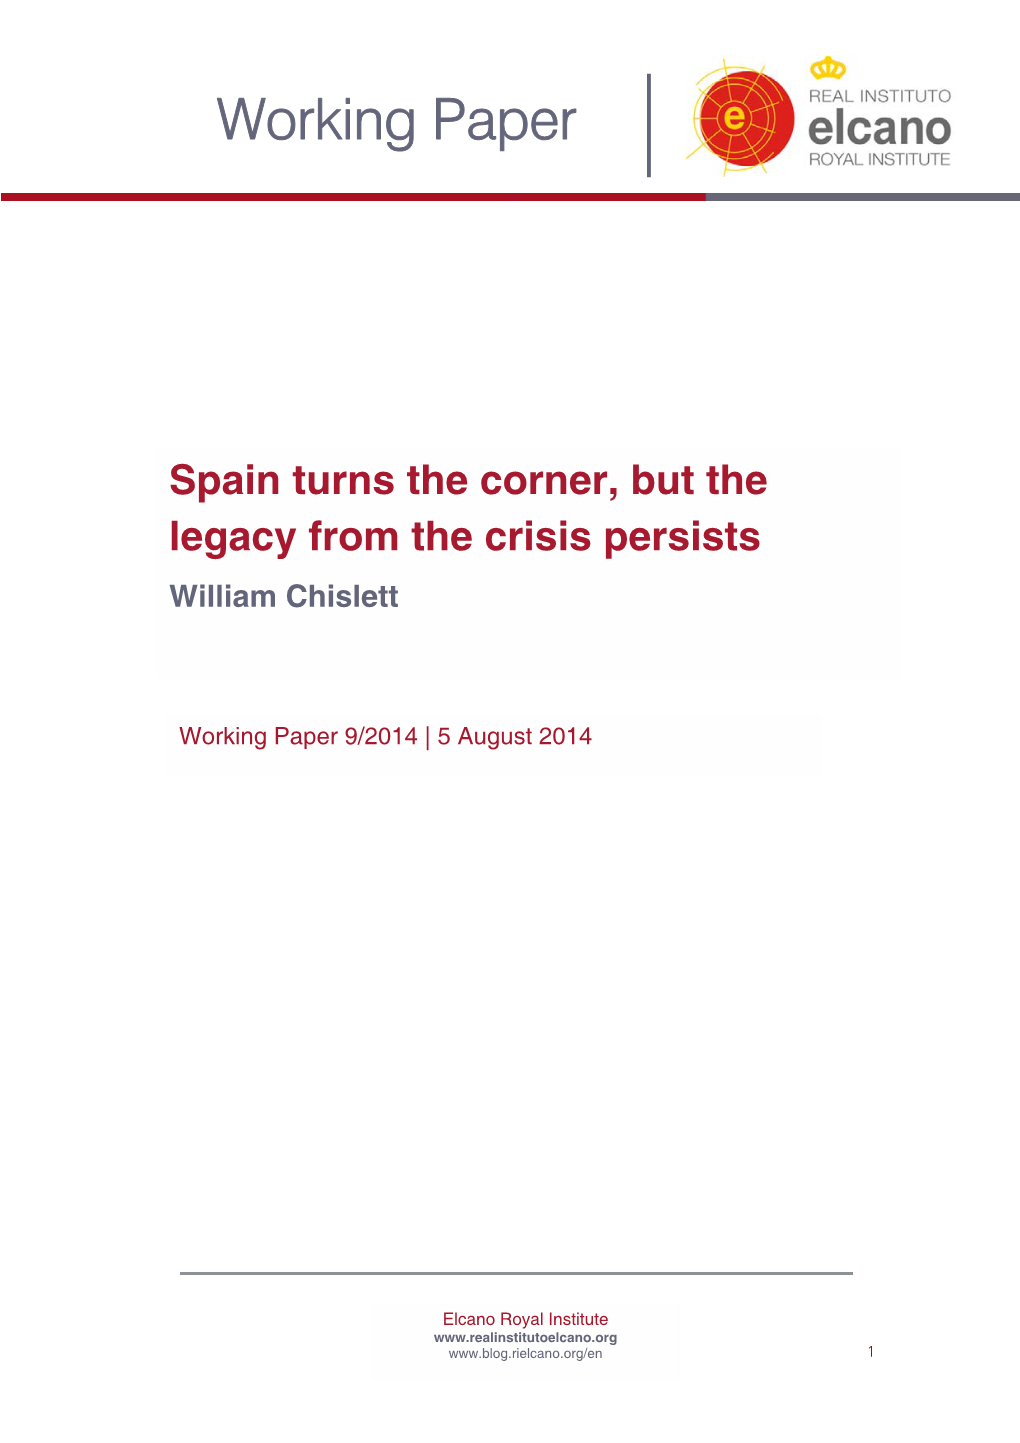 Spain Turns the Corner, but the Legacy from the Crisis Persists William Chislett